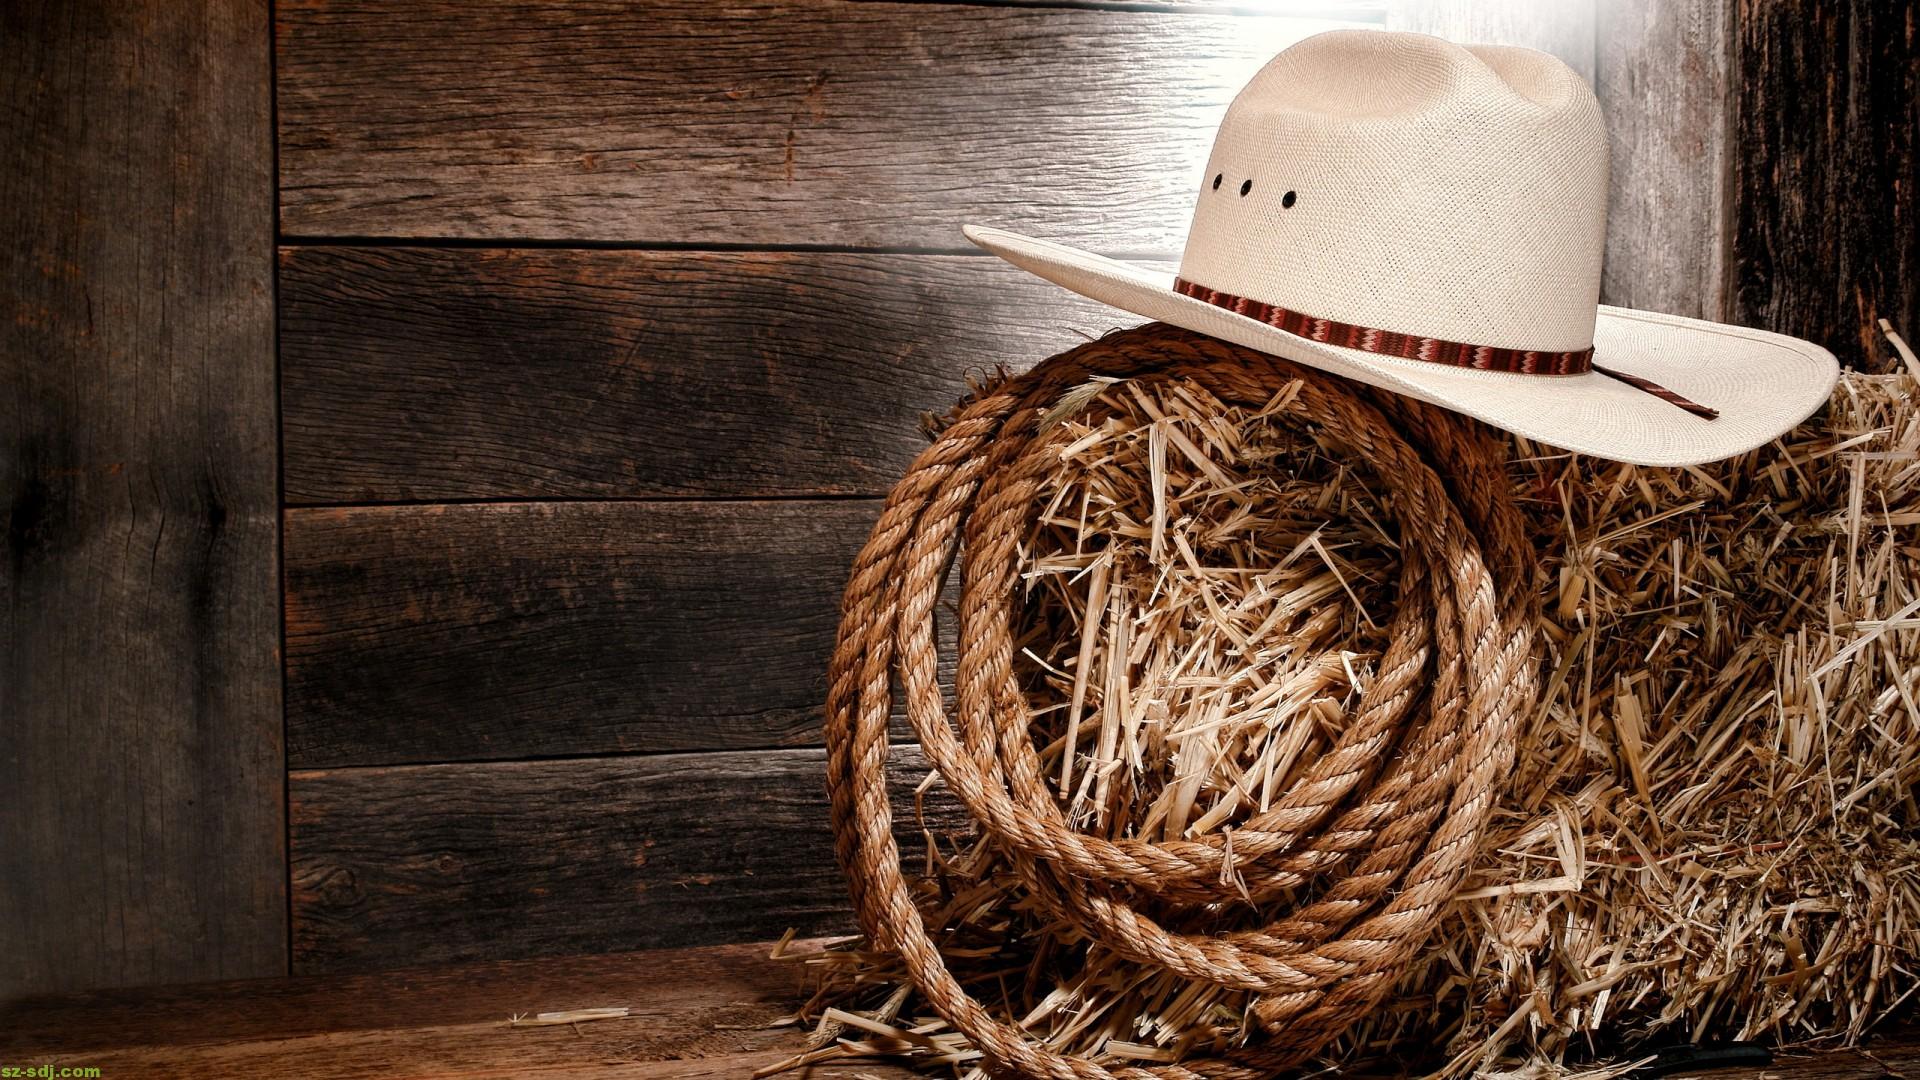 A white cowboy hat on a bale of hay in a barn - Cowgirl, western